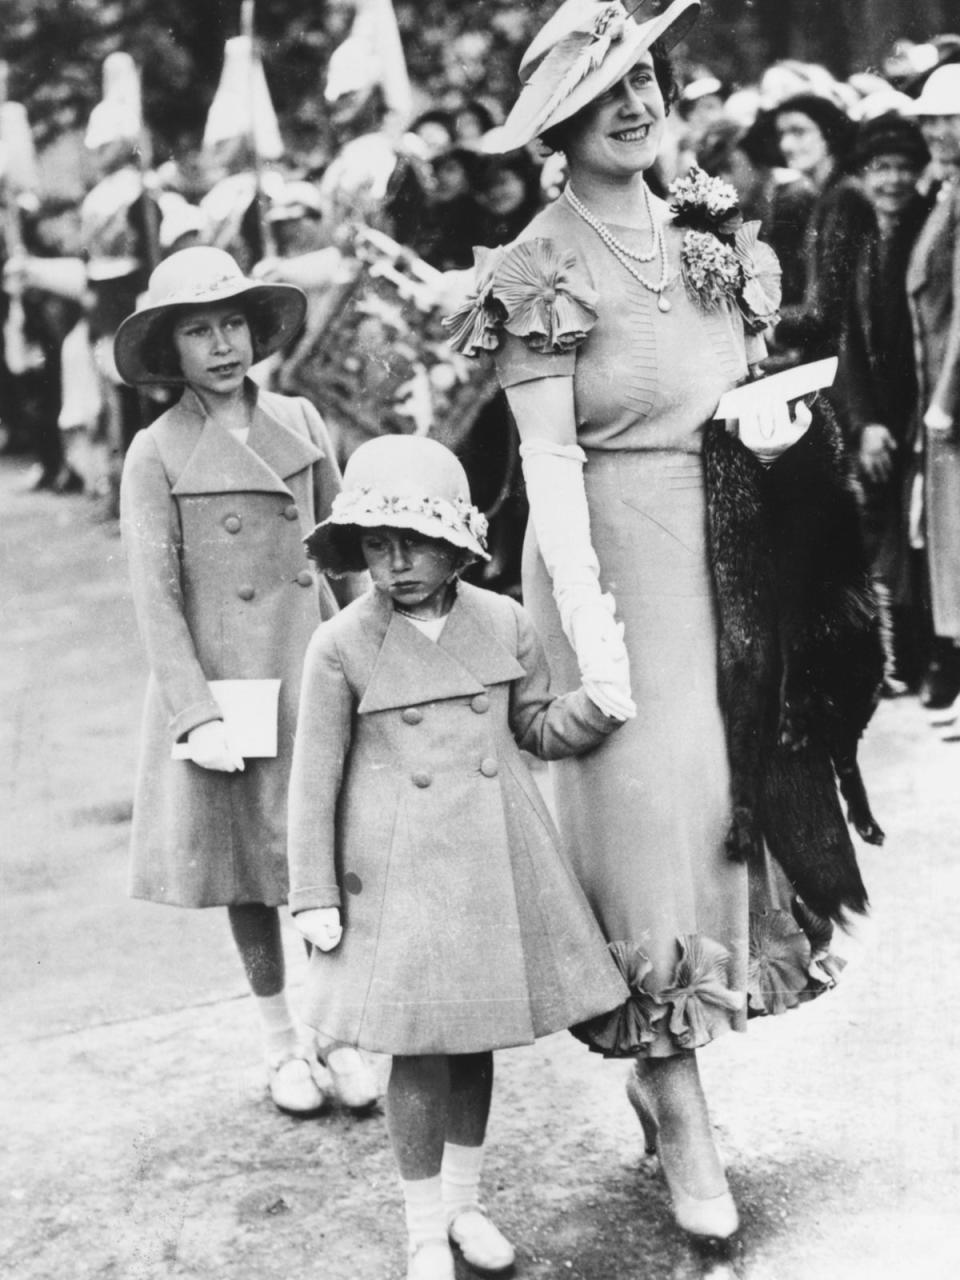 Queen Elizabeth II: The 9-year-old Elizabeth attends an aristocratic wedding with her mother and younger sister. Later in that year with the death of her Grandfather and the Abdication of her Uncle Edward VIII she became first in line to the throne, 1936 (Getty)